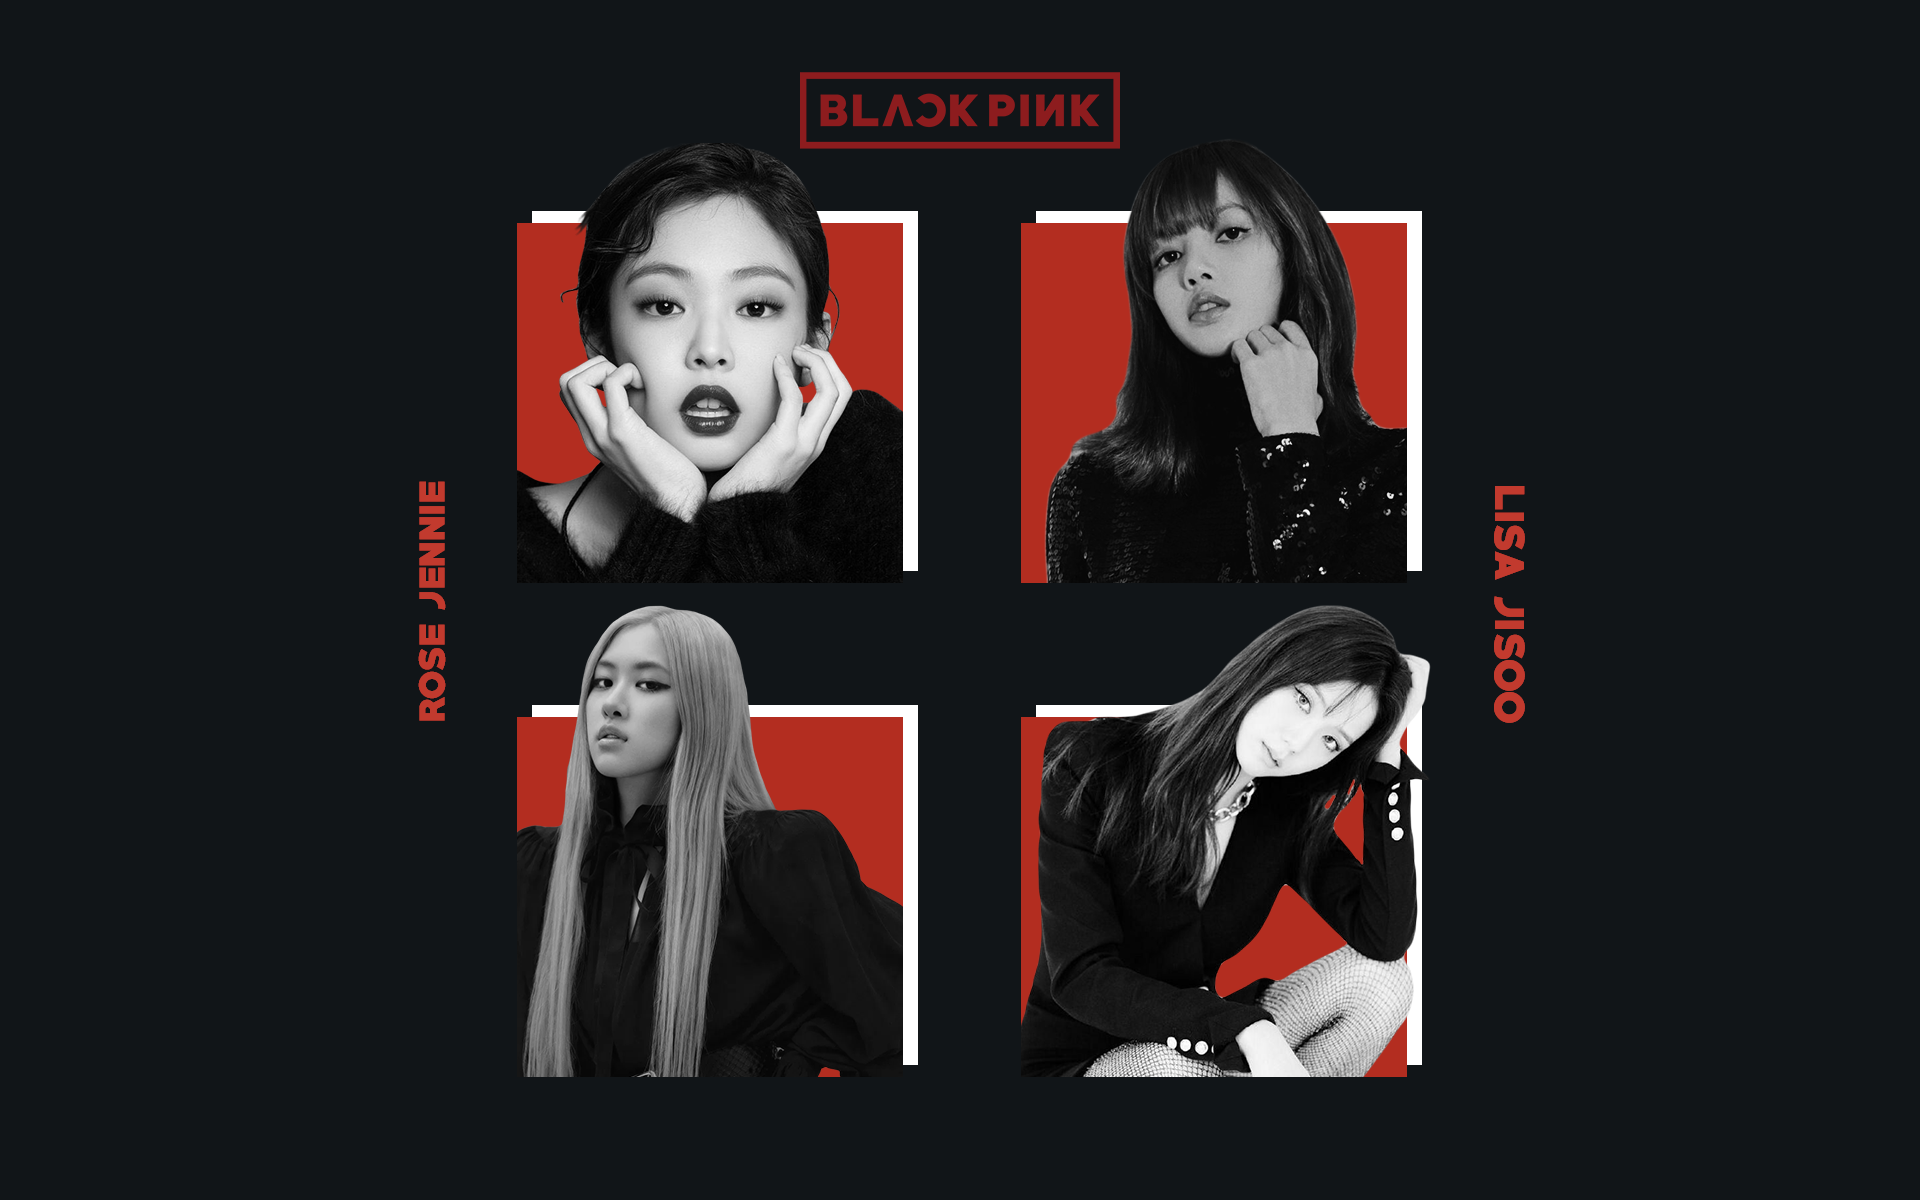 BLACKPINK wallpaper of all the 4 members